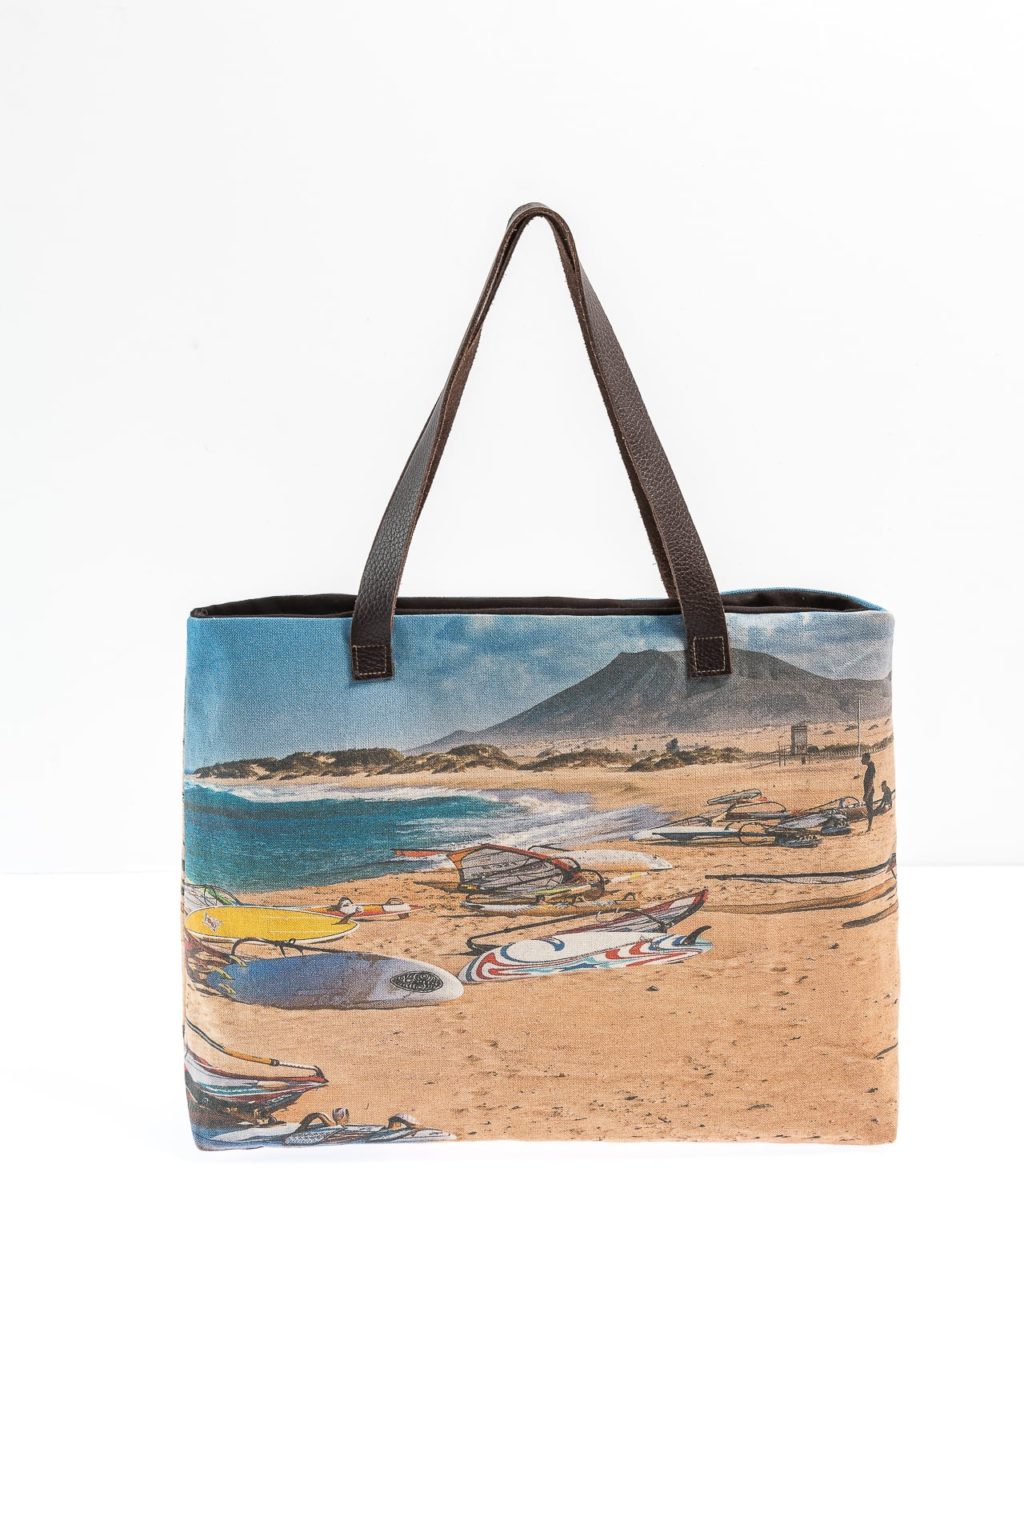 Windsurfing frontal tote